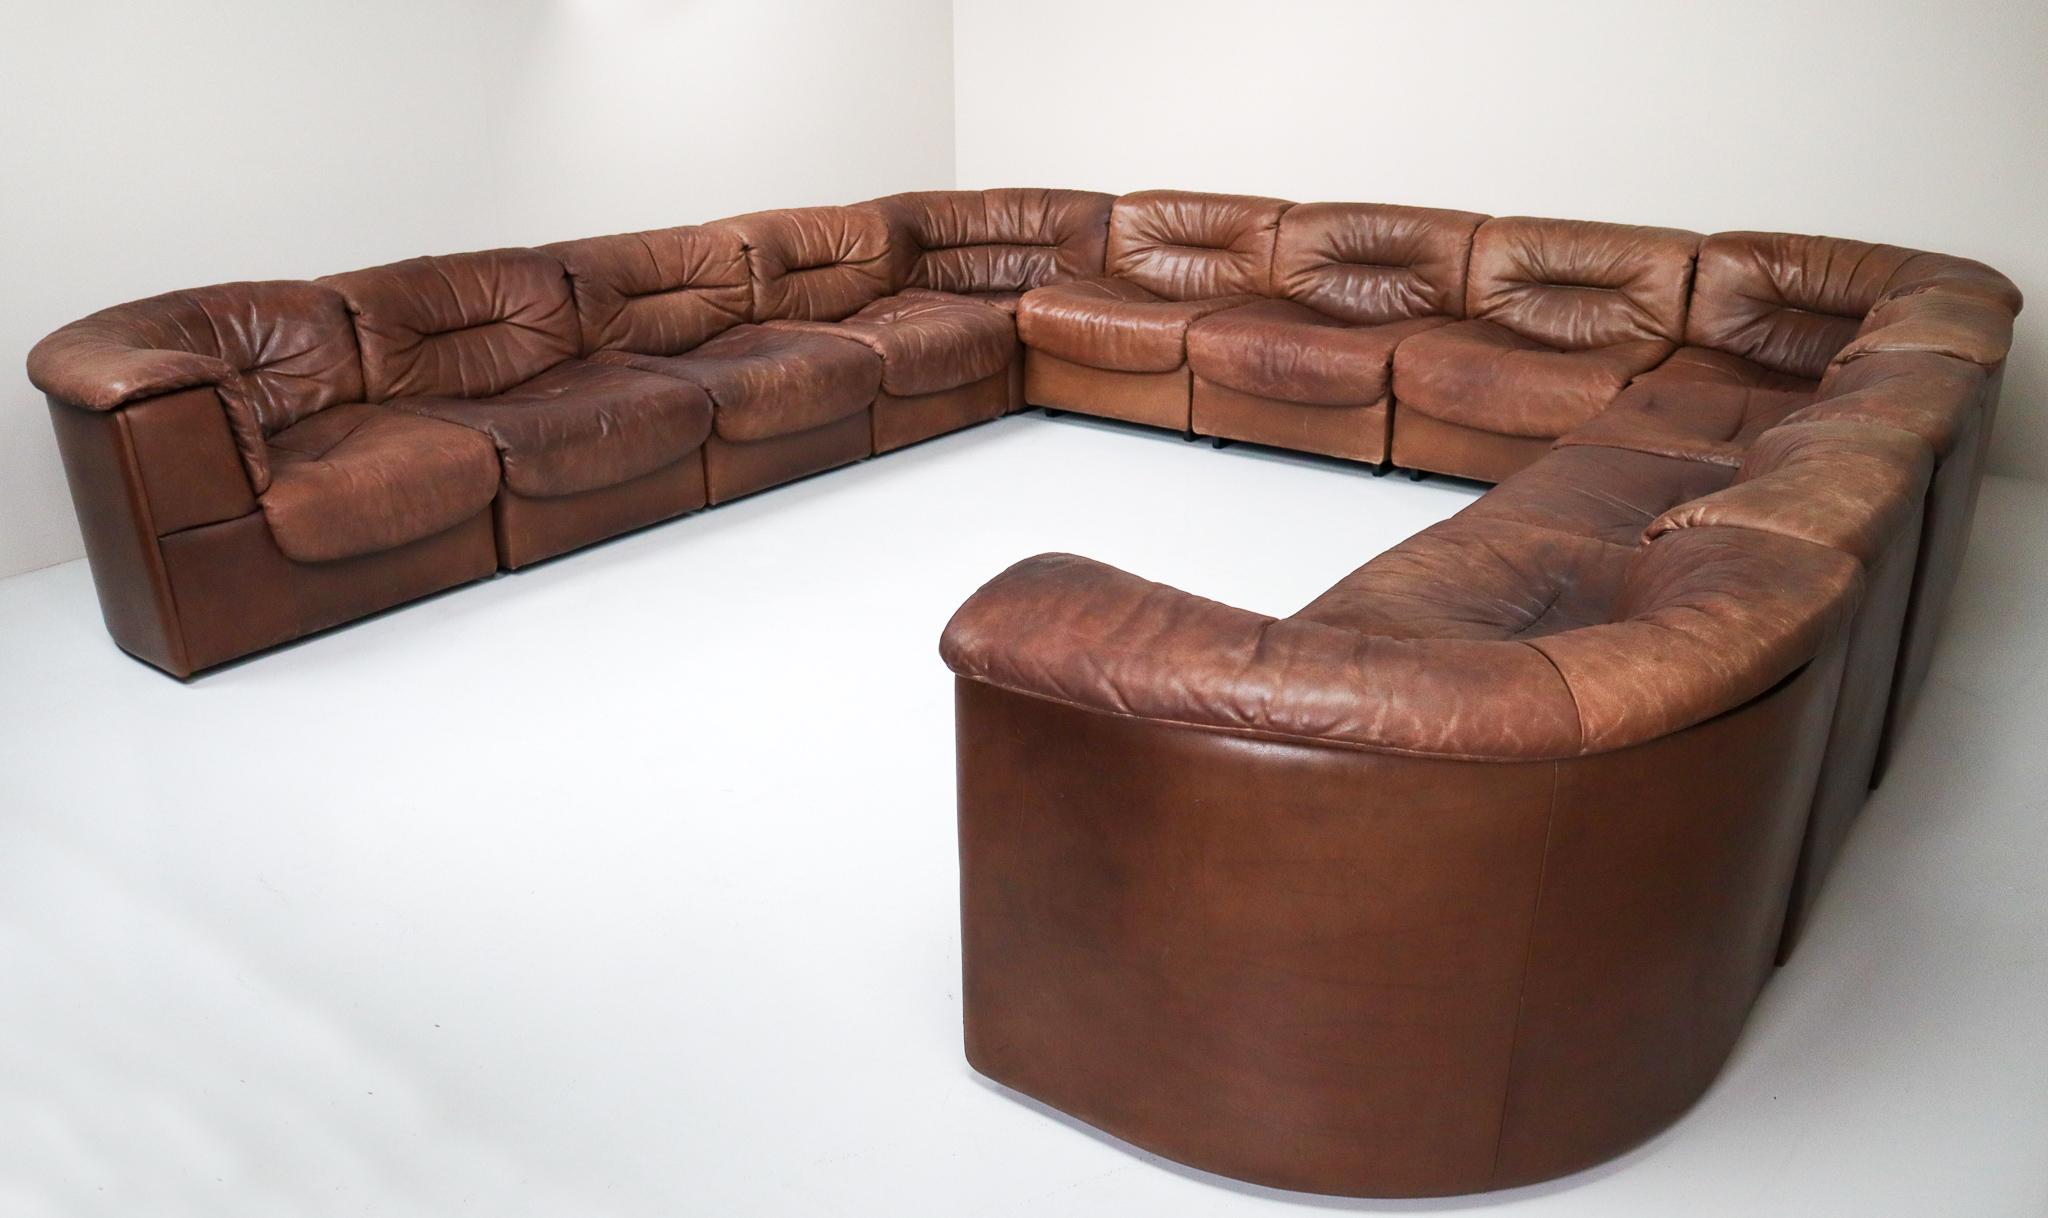 Large set of 19 elements patinated leather De Sede DS 14 modular sofa, 1970.
This comfortable leather sofa is manufactured by De Sede in Switzerland. Sectional sofa by the Swiss quality manufacturer De Sede. This large sofa exists of 19 elements, 6